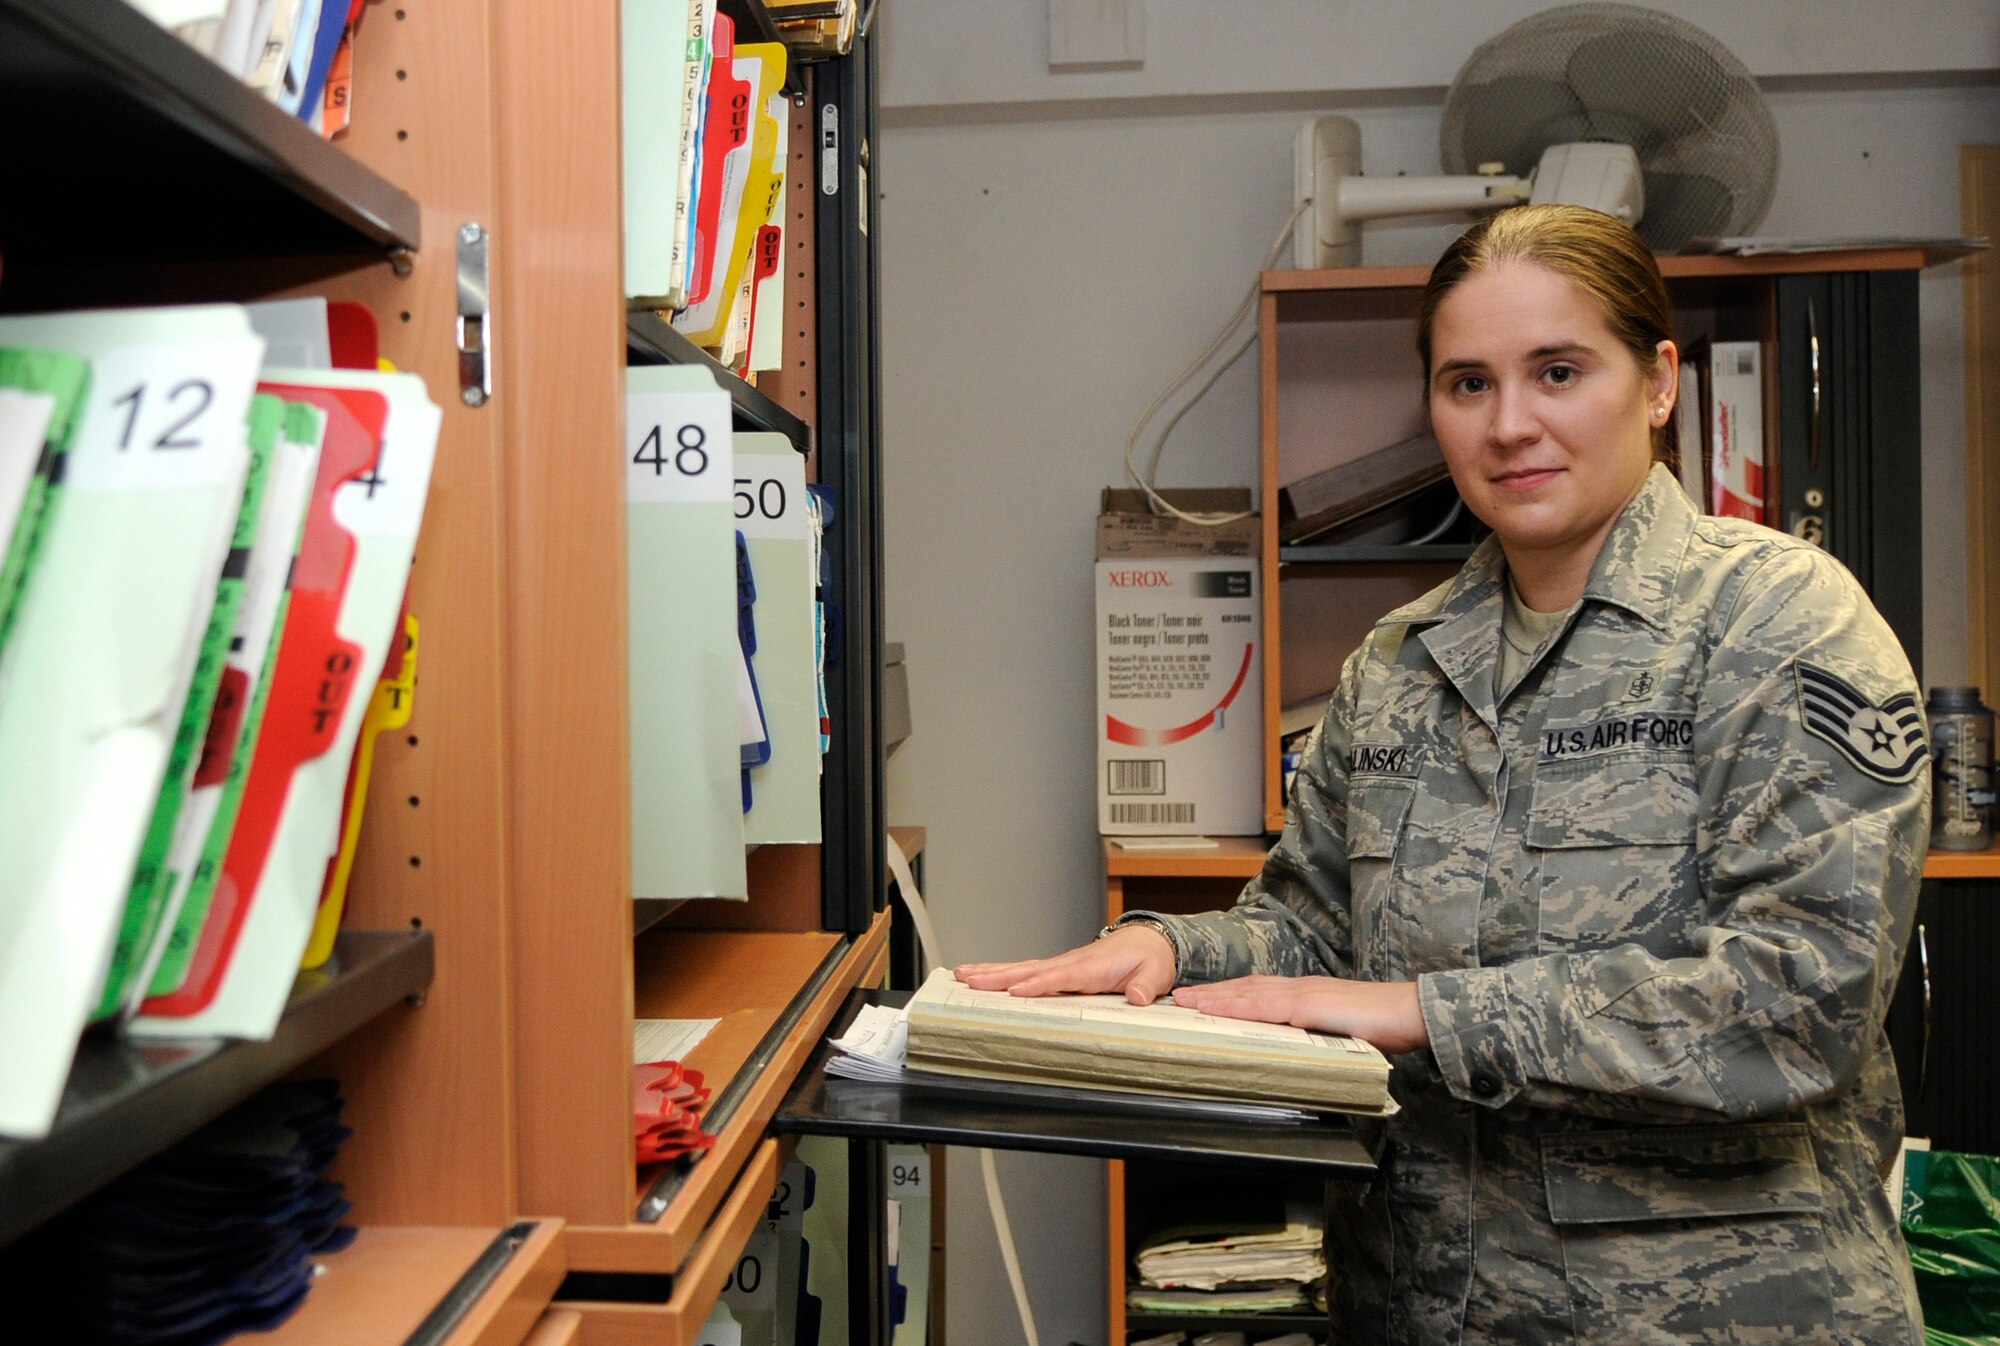 Staff Sgt. Tamara Opalinski, 52nd Aerospace Medical Squadron, is the 52nd Fighter Wing's Top Saber Performer for the week of Jan. 8-14. (U.S. Air Force photo/Airman 1st Class Staci Miller)